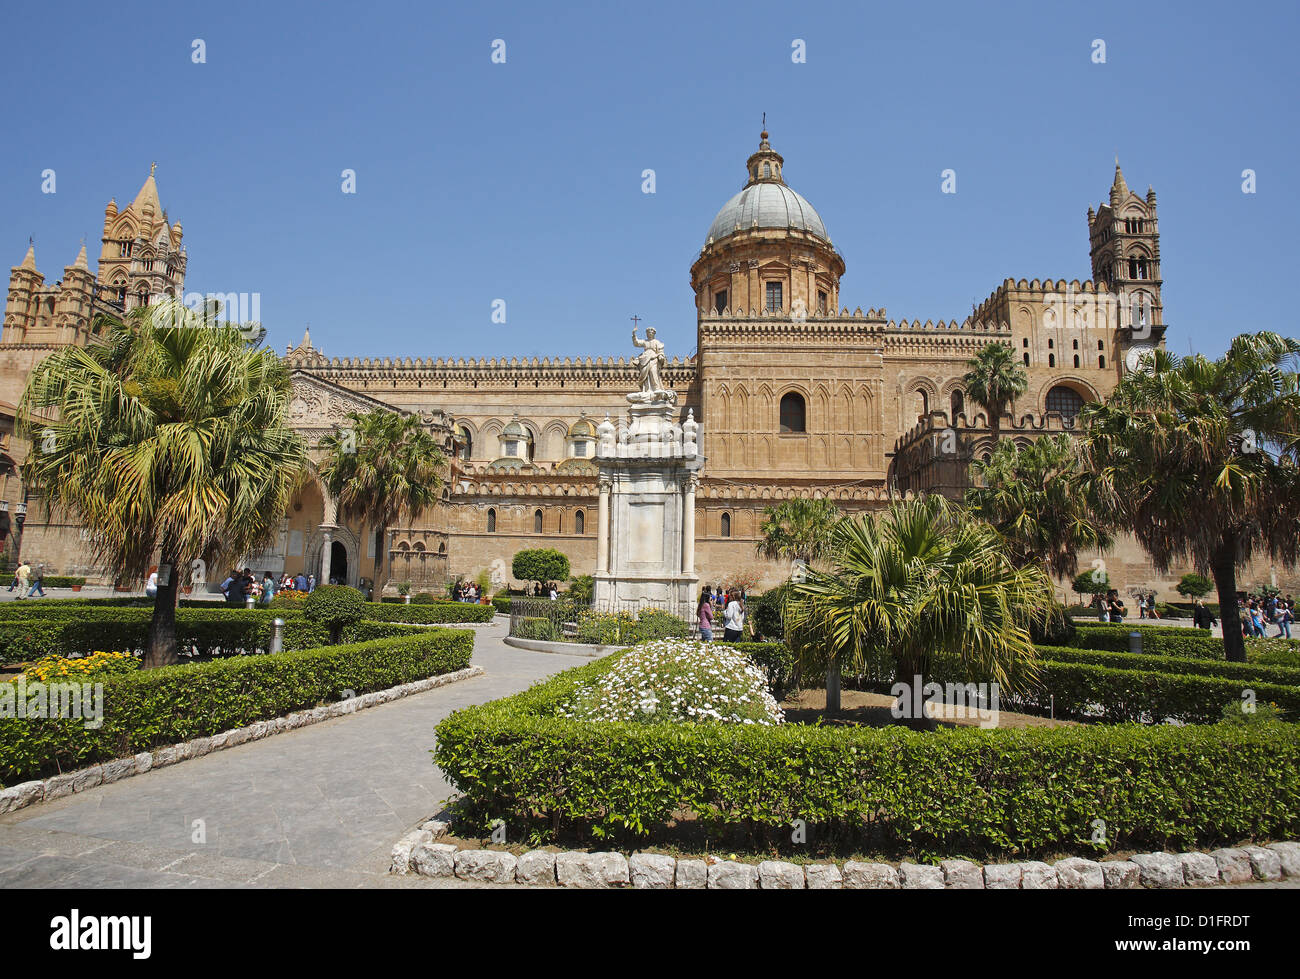 The Cathedral of Palermo, Palermo, Italy Stock Photo